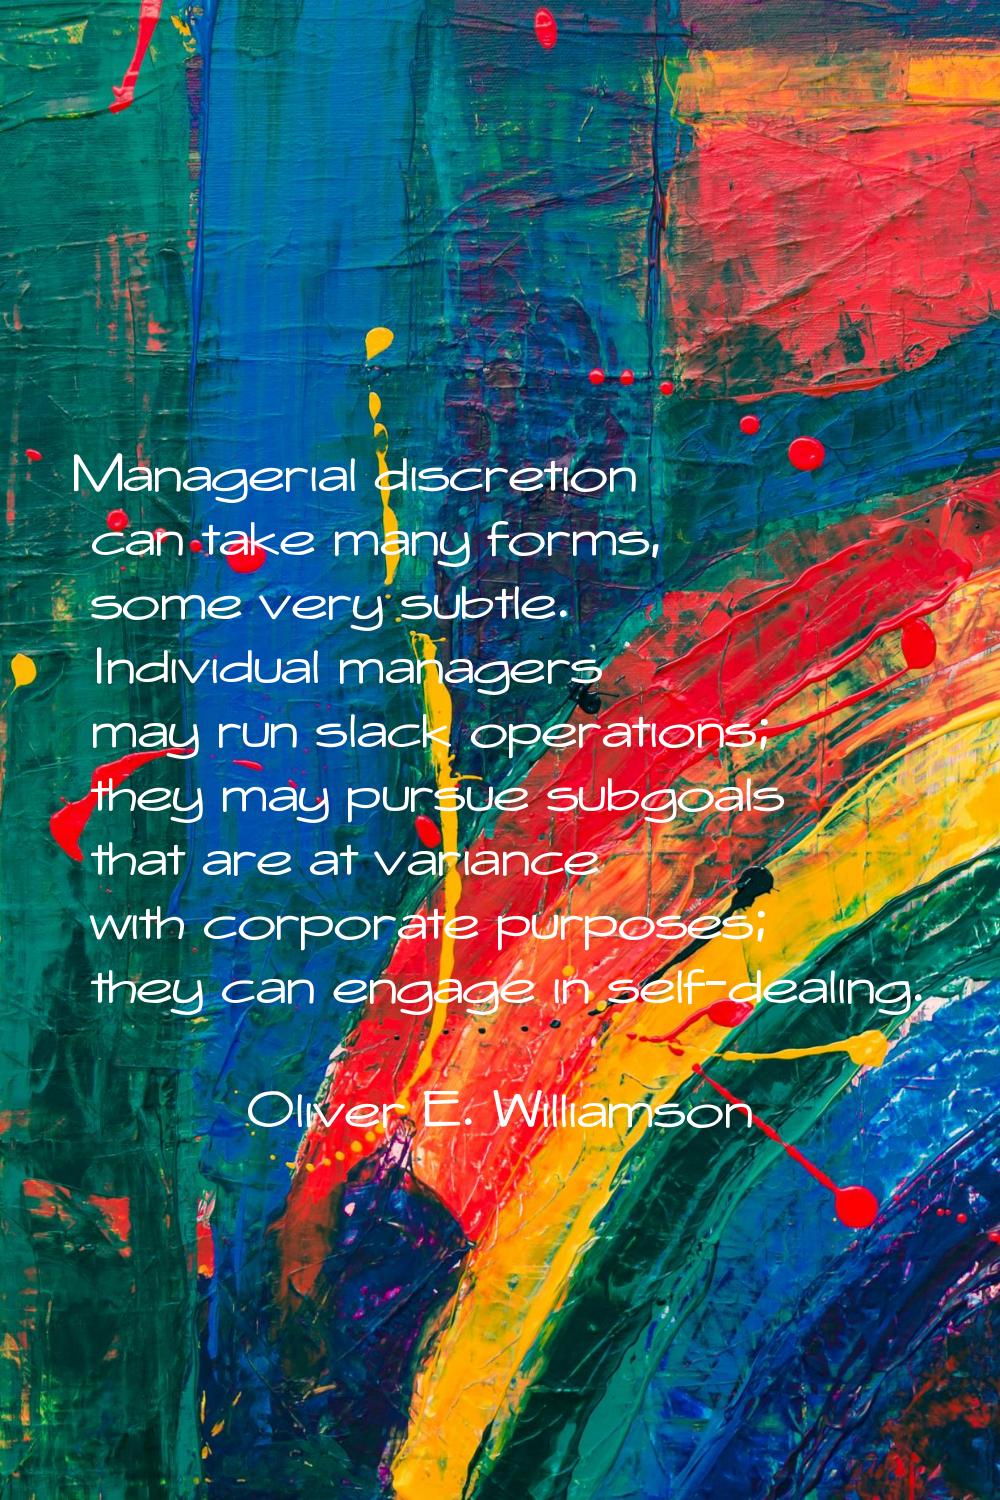 Managerial discretion can take many forms, some very subtle. Individual managers may run slack oper